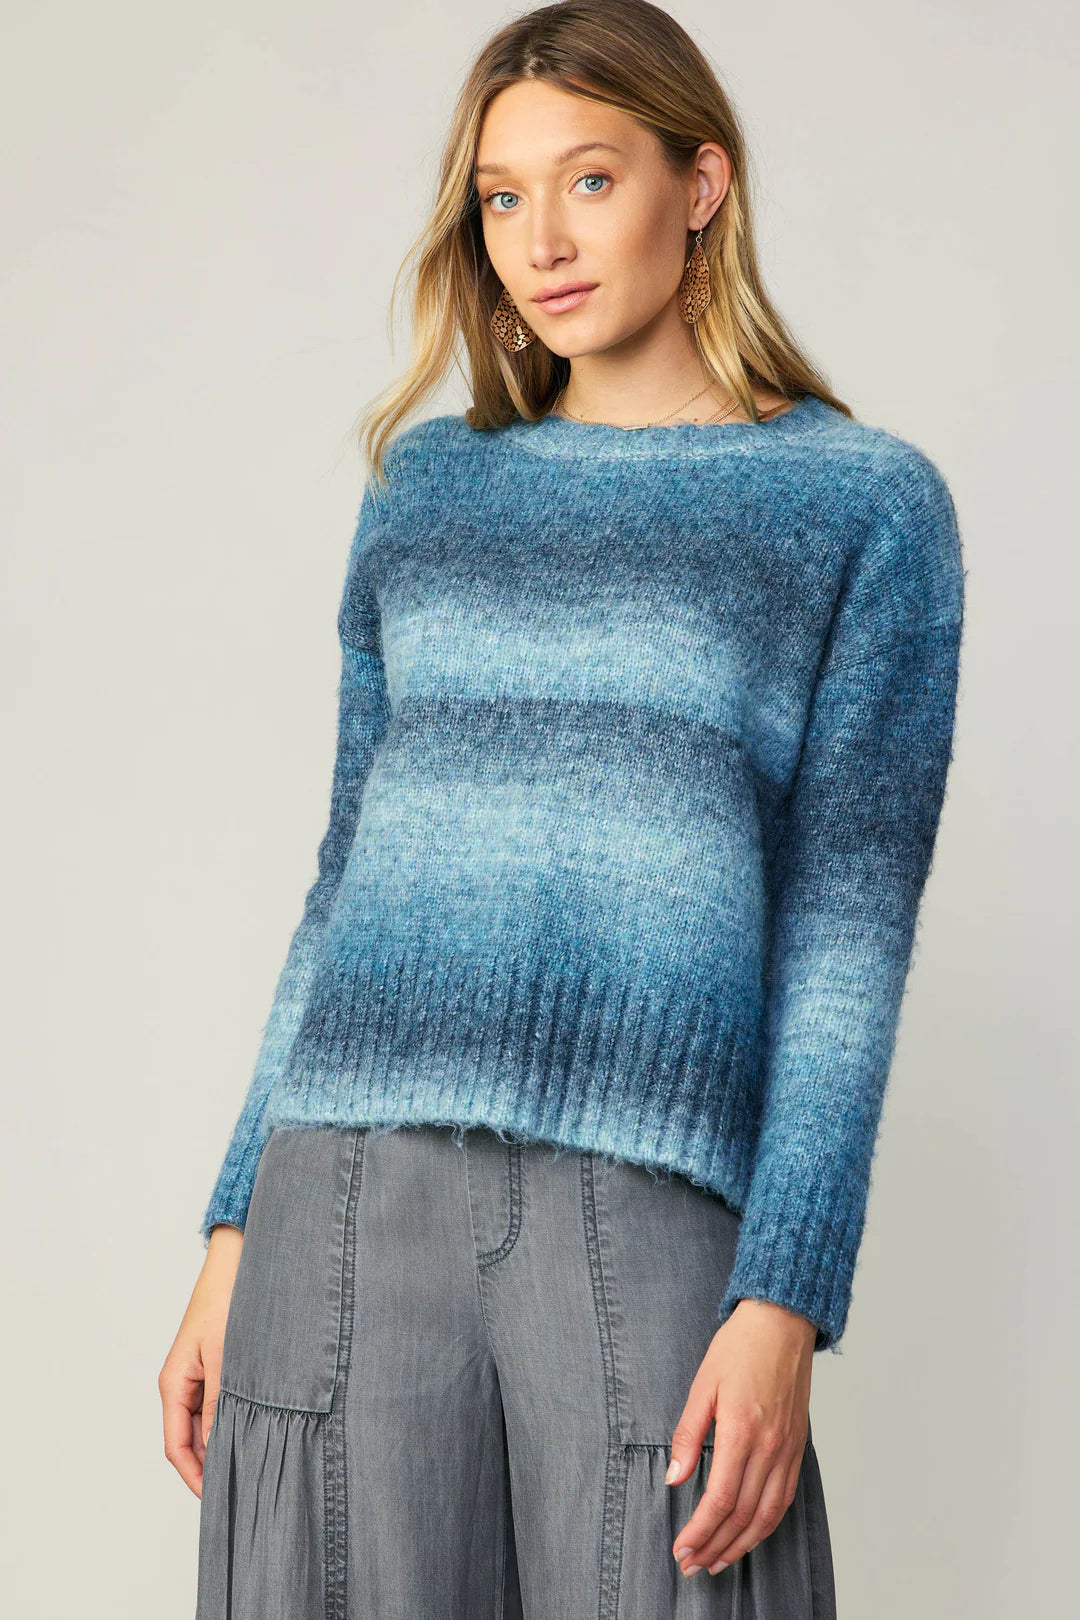 Ombre Sweater98.